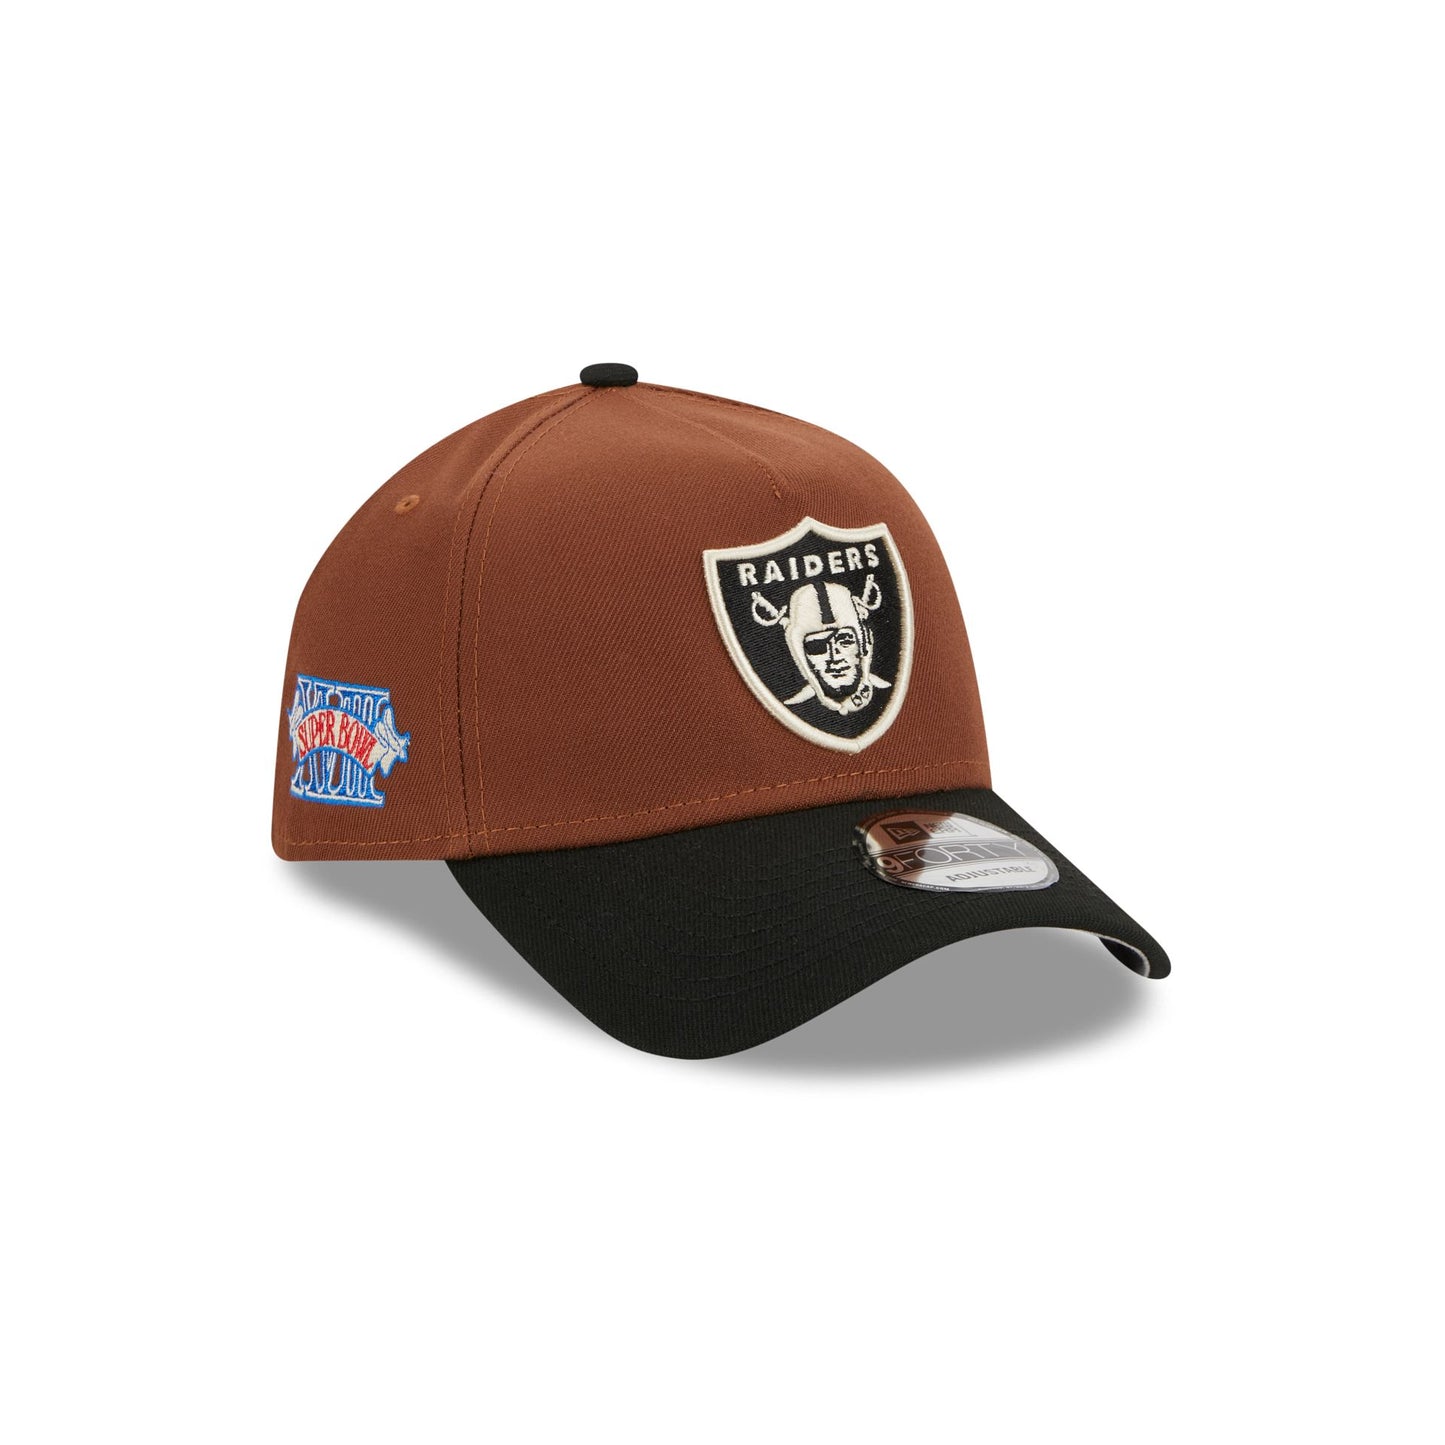 New Era Las Vegas Raiders Harvest 59FIFTY Fitted Hat